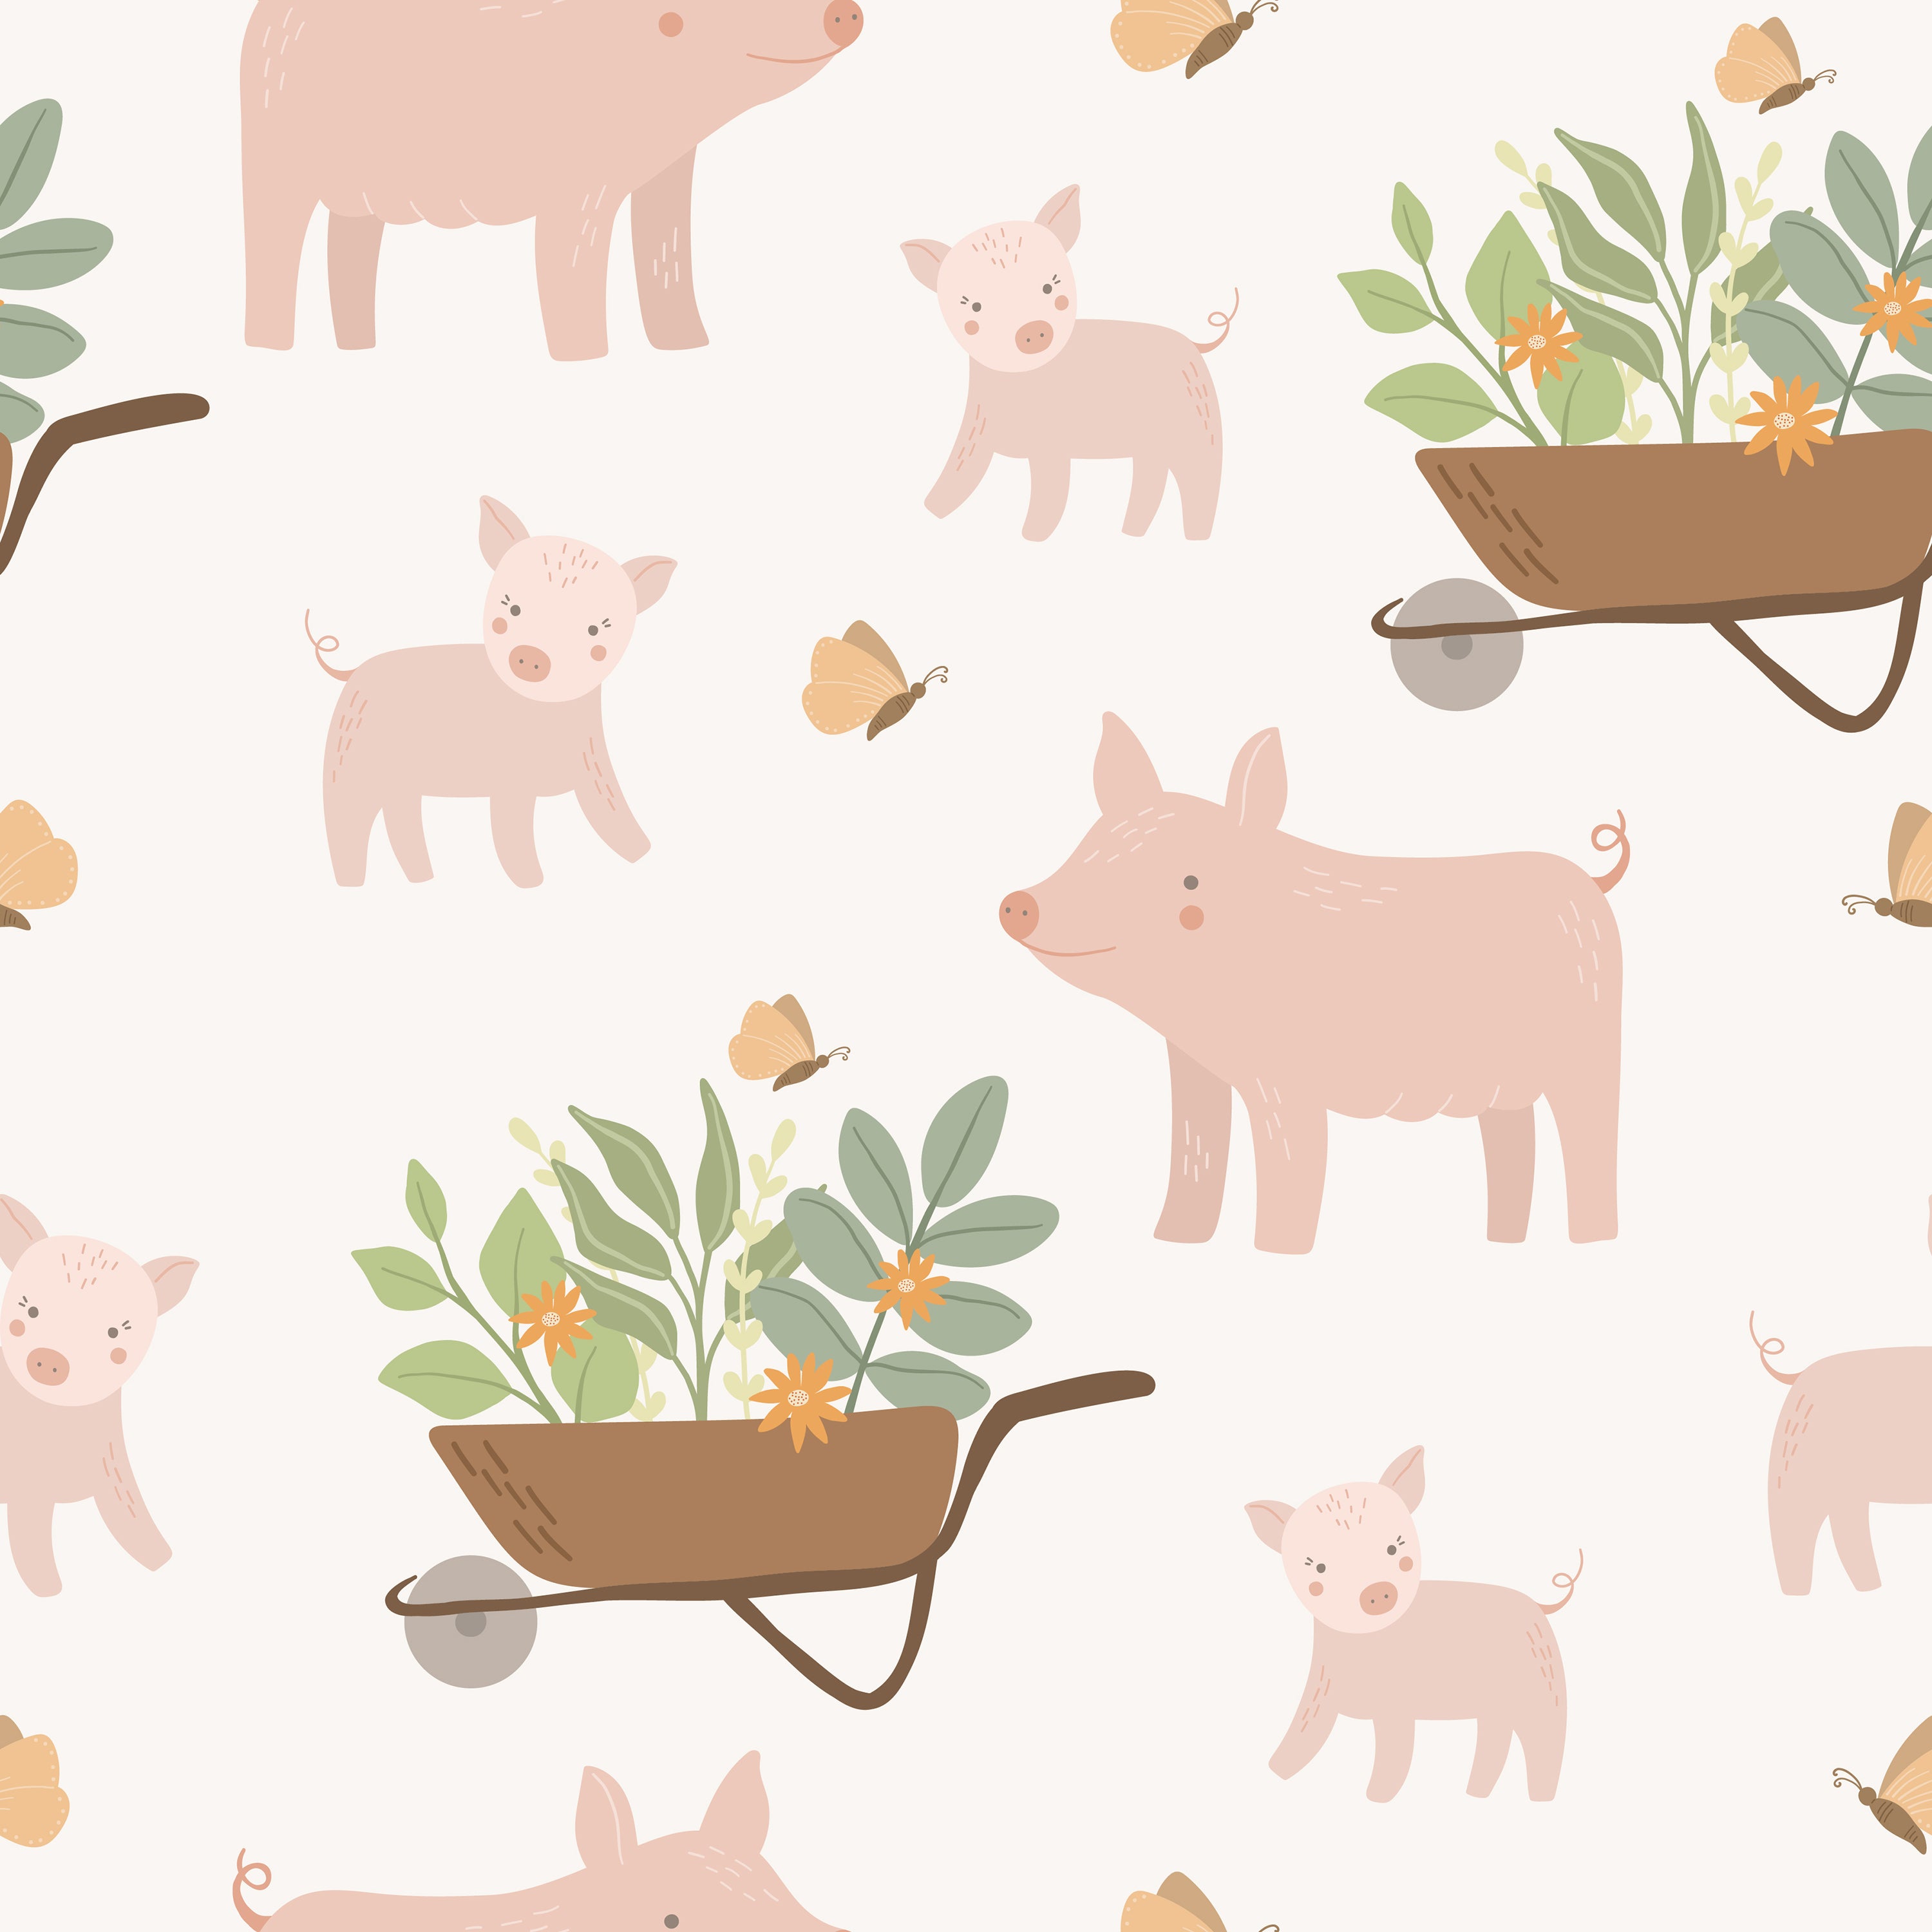 Charming wallpaper pattern featuring pale pink pigs in various poses with wheelbarrows full of green plants and orange flowers, interspersed with fluttering butterflies on a light background, ideal for a nursery or child's room.